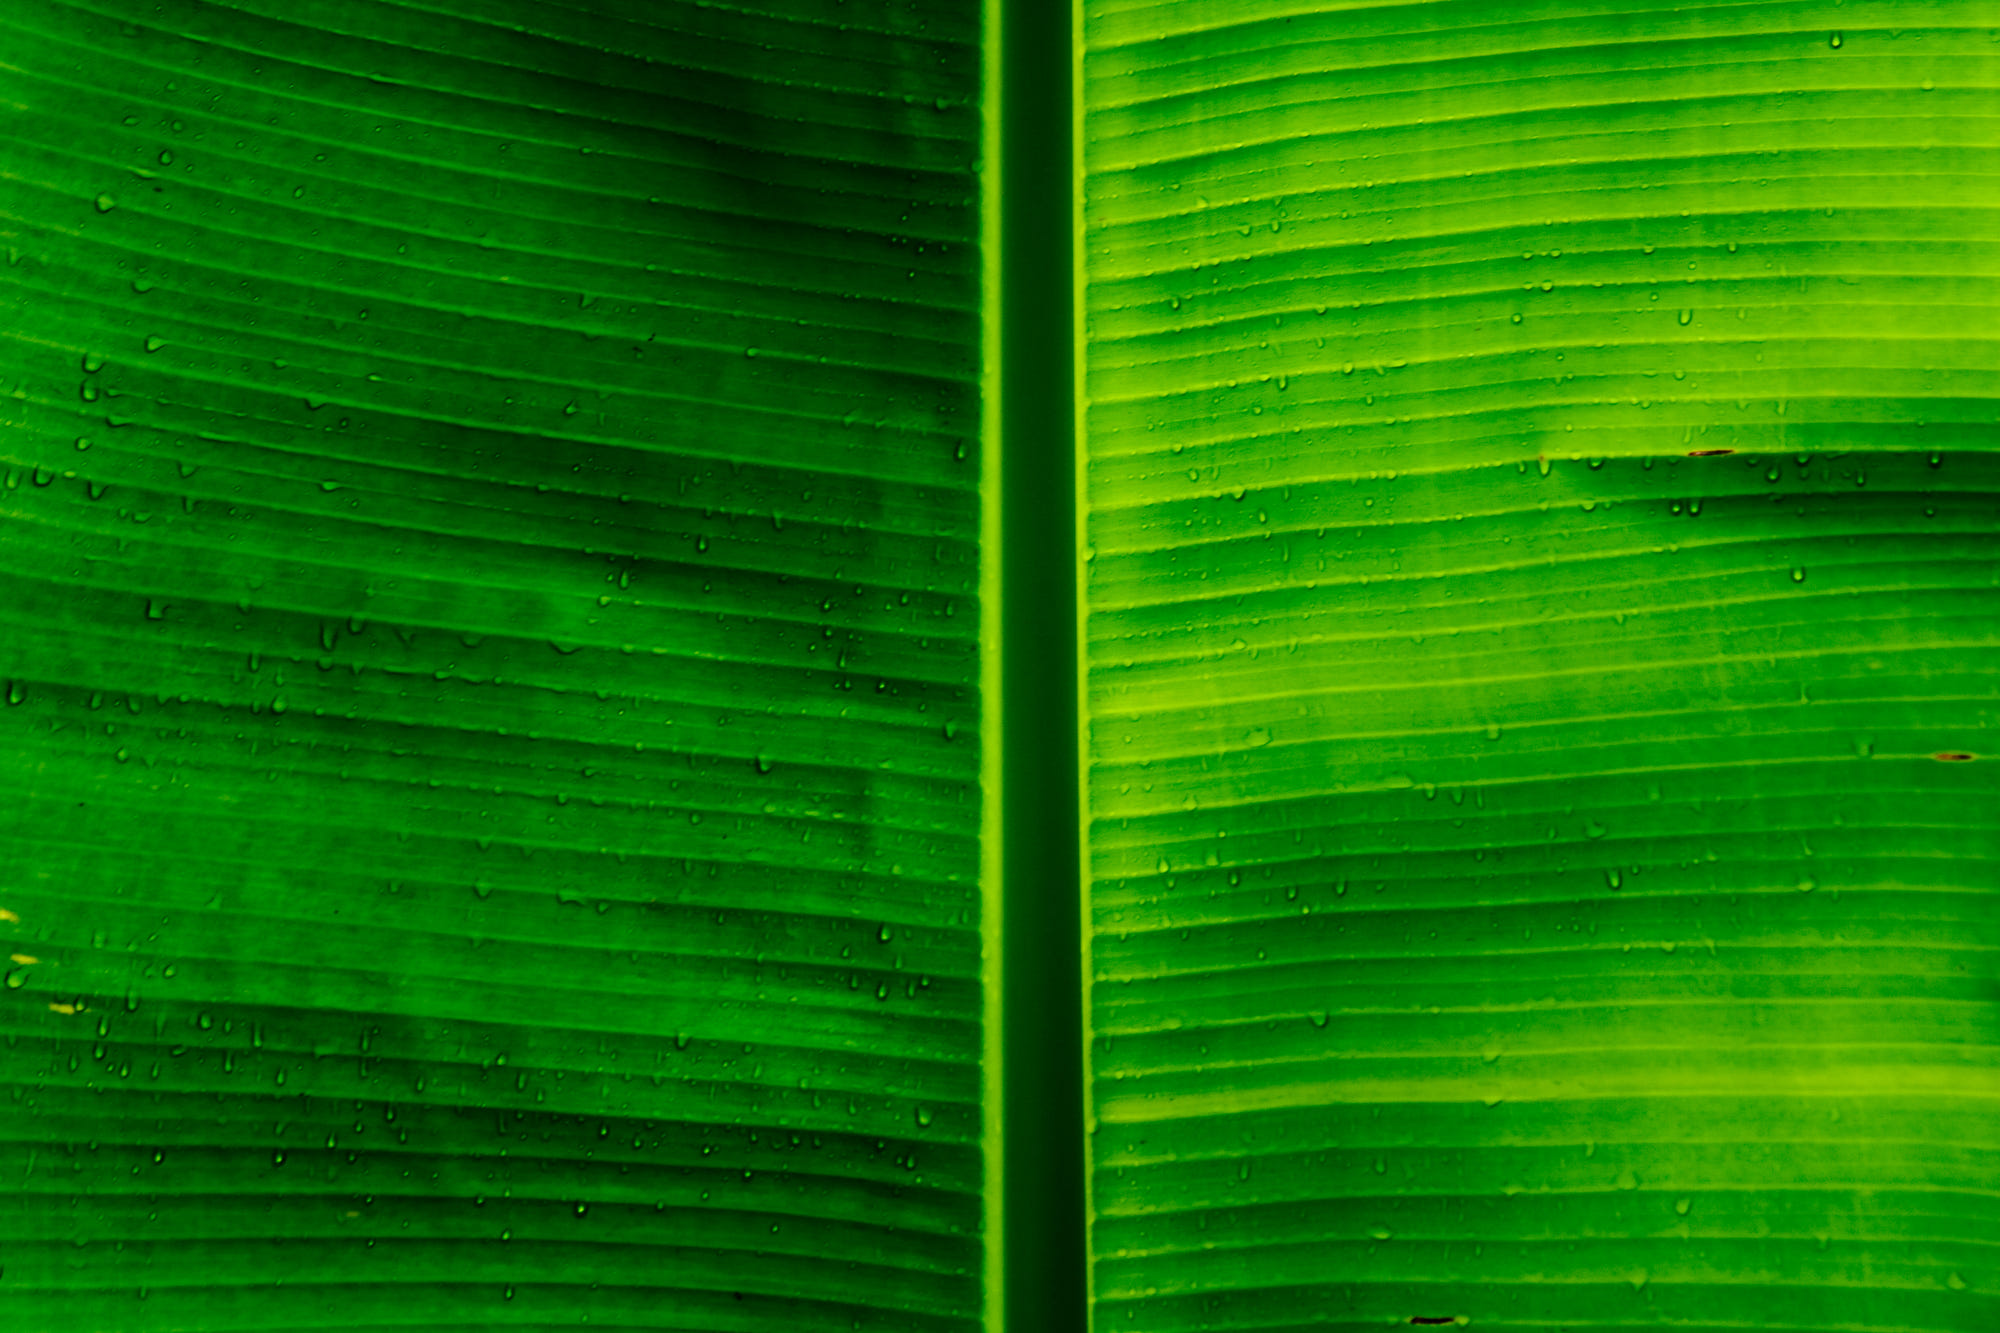 Banana leaf texture by Mike NEE - Photo 26717185 / 500px